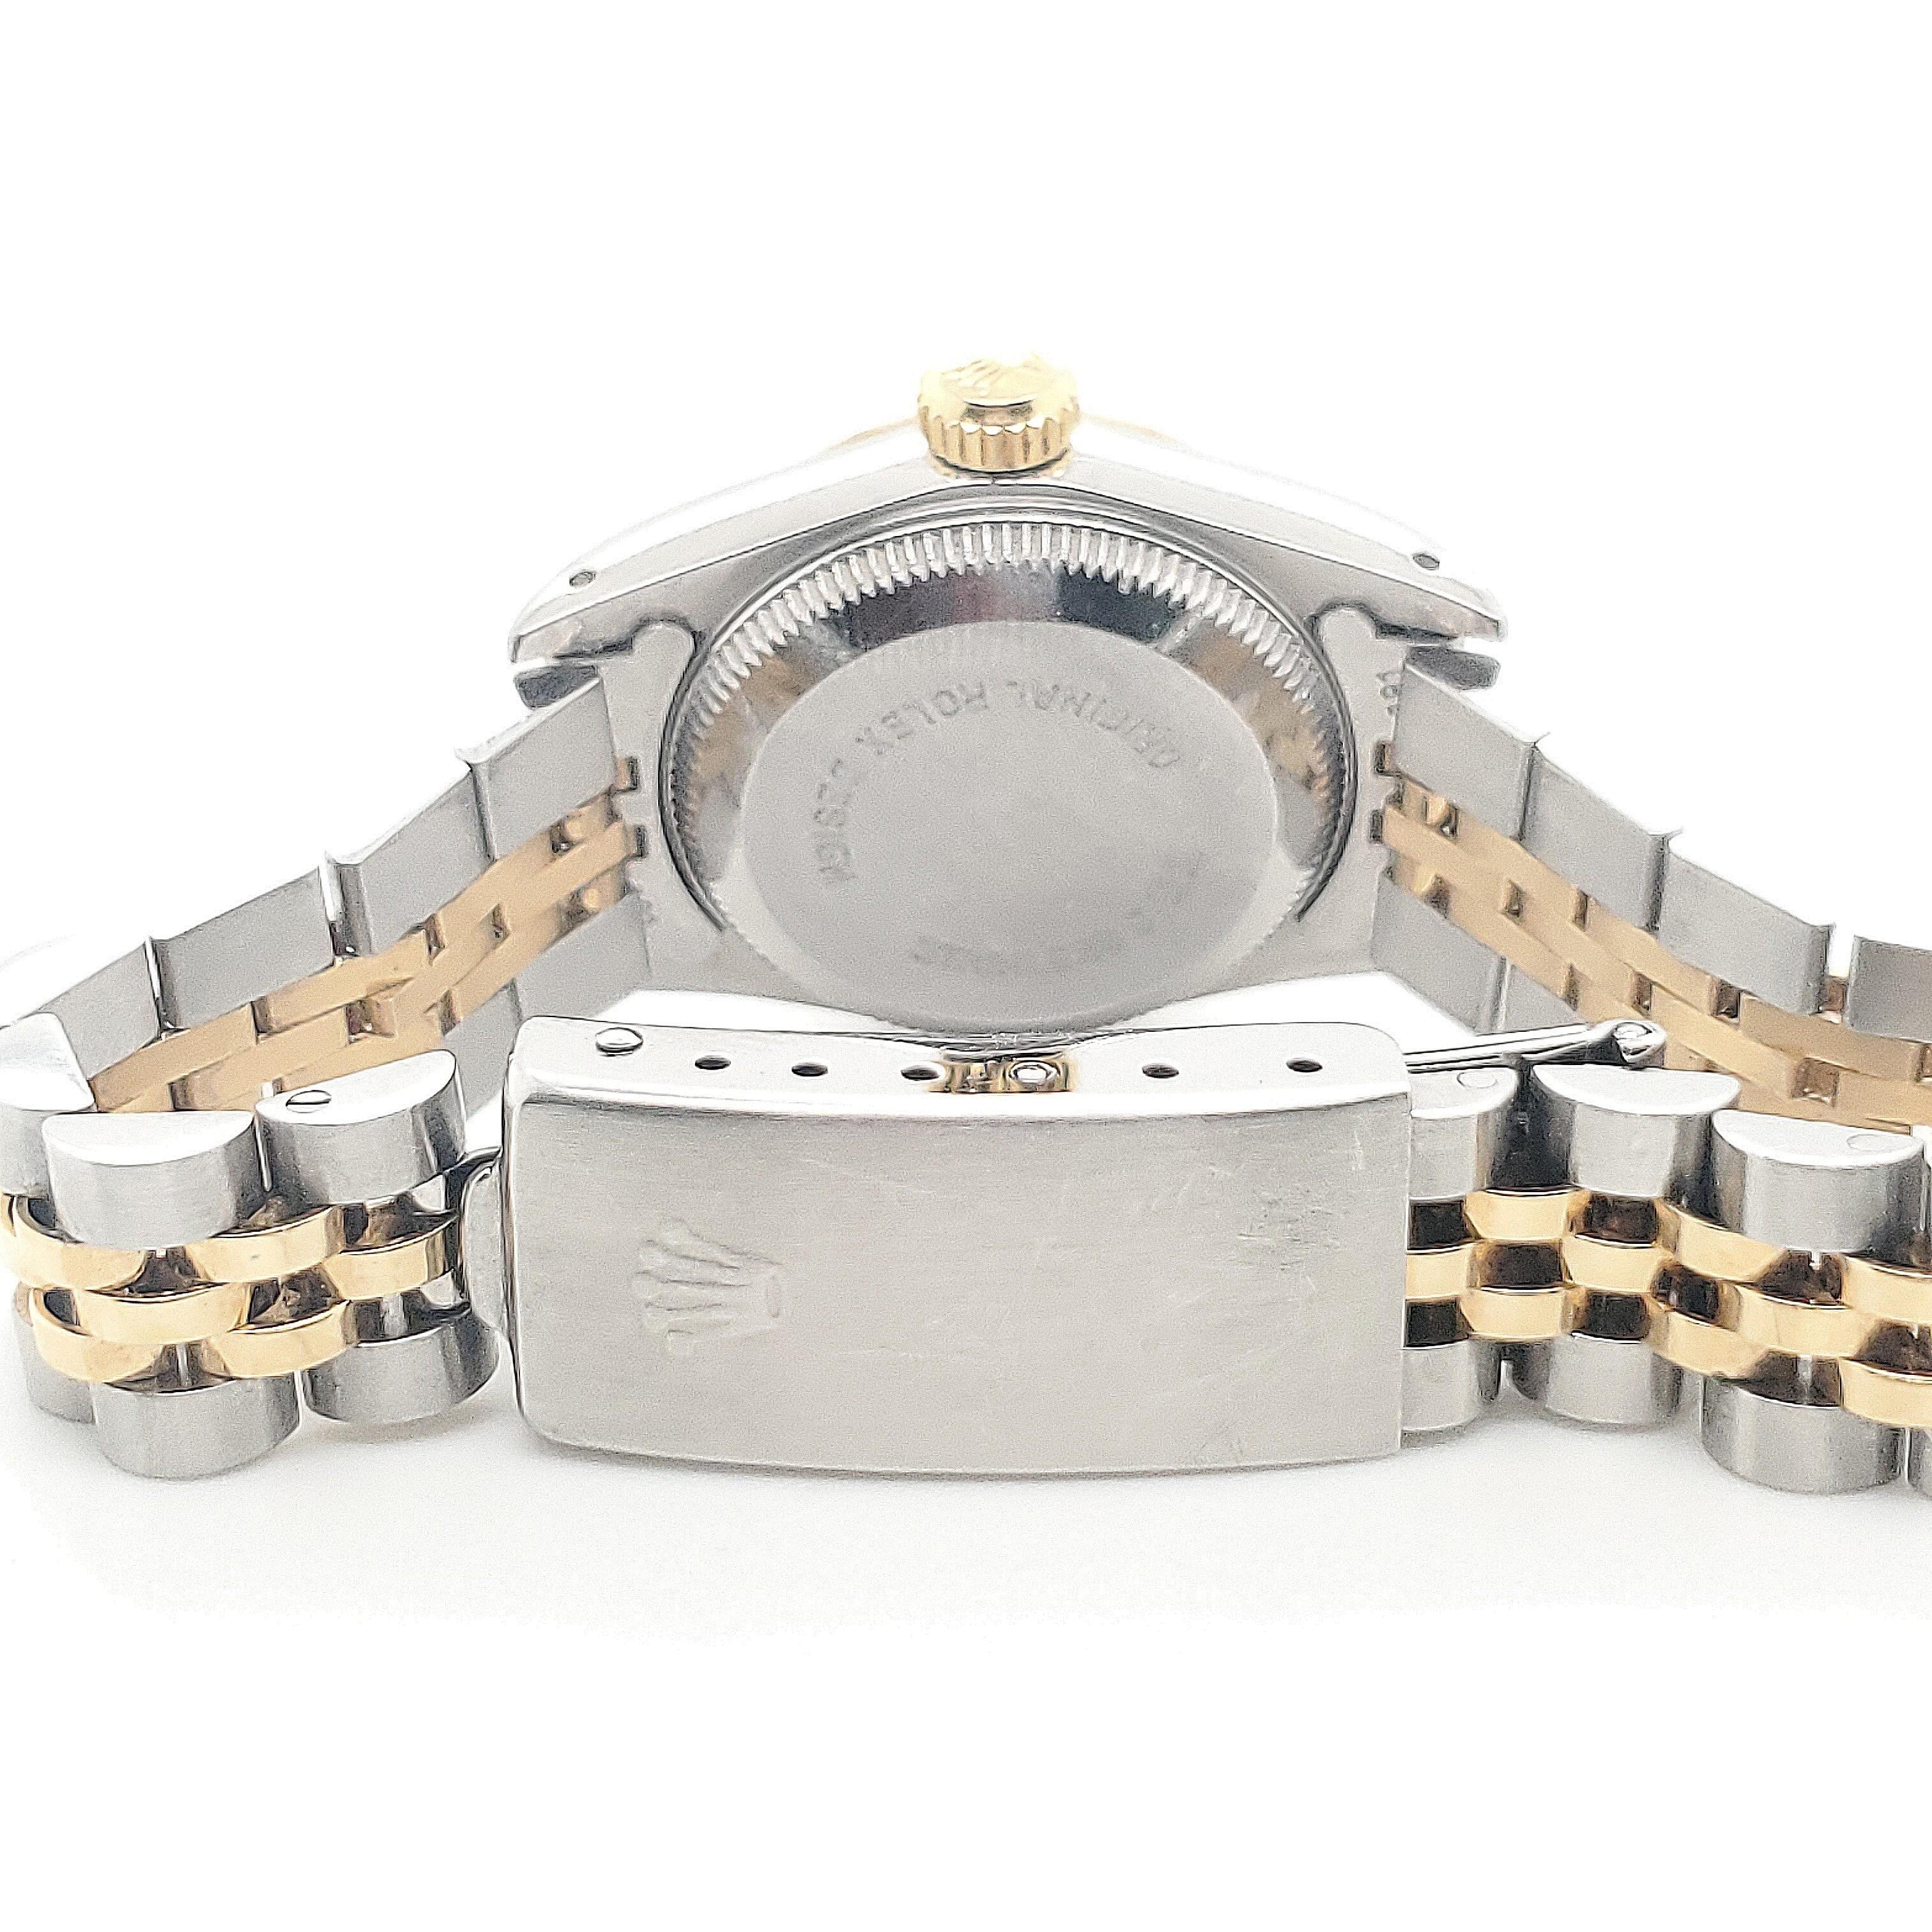 Stainless Steel and Gold Rolex Oyster Perpetual 1